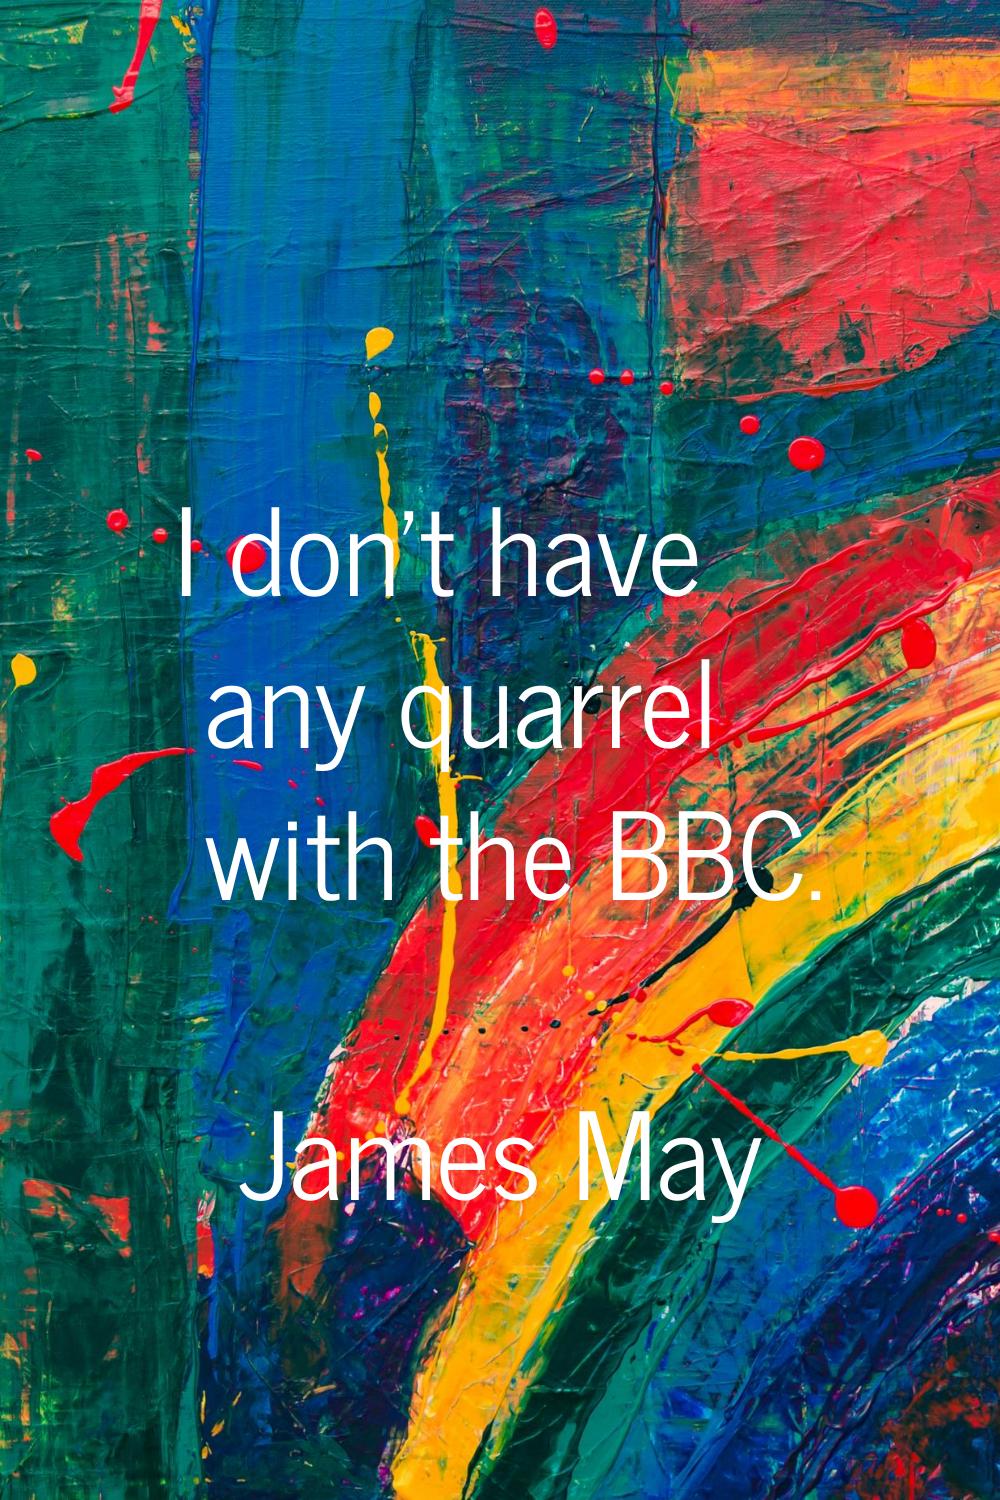 I don't have any quarrel with the BBC.